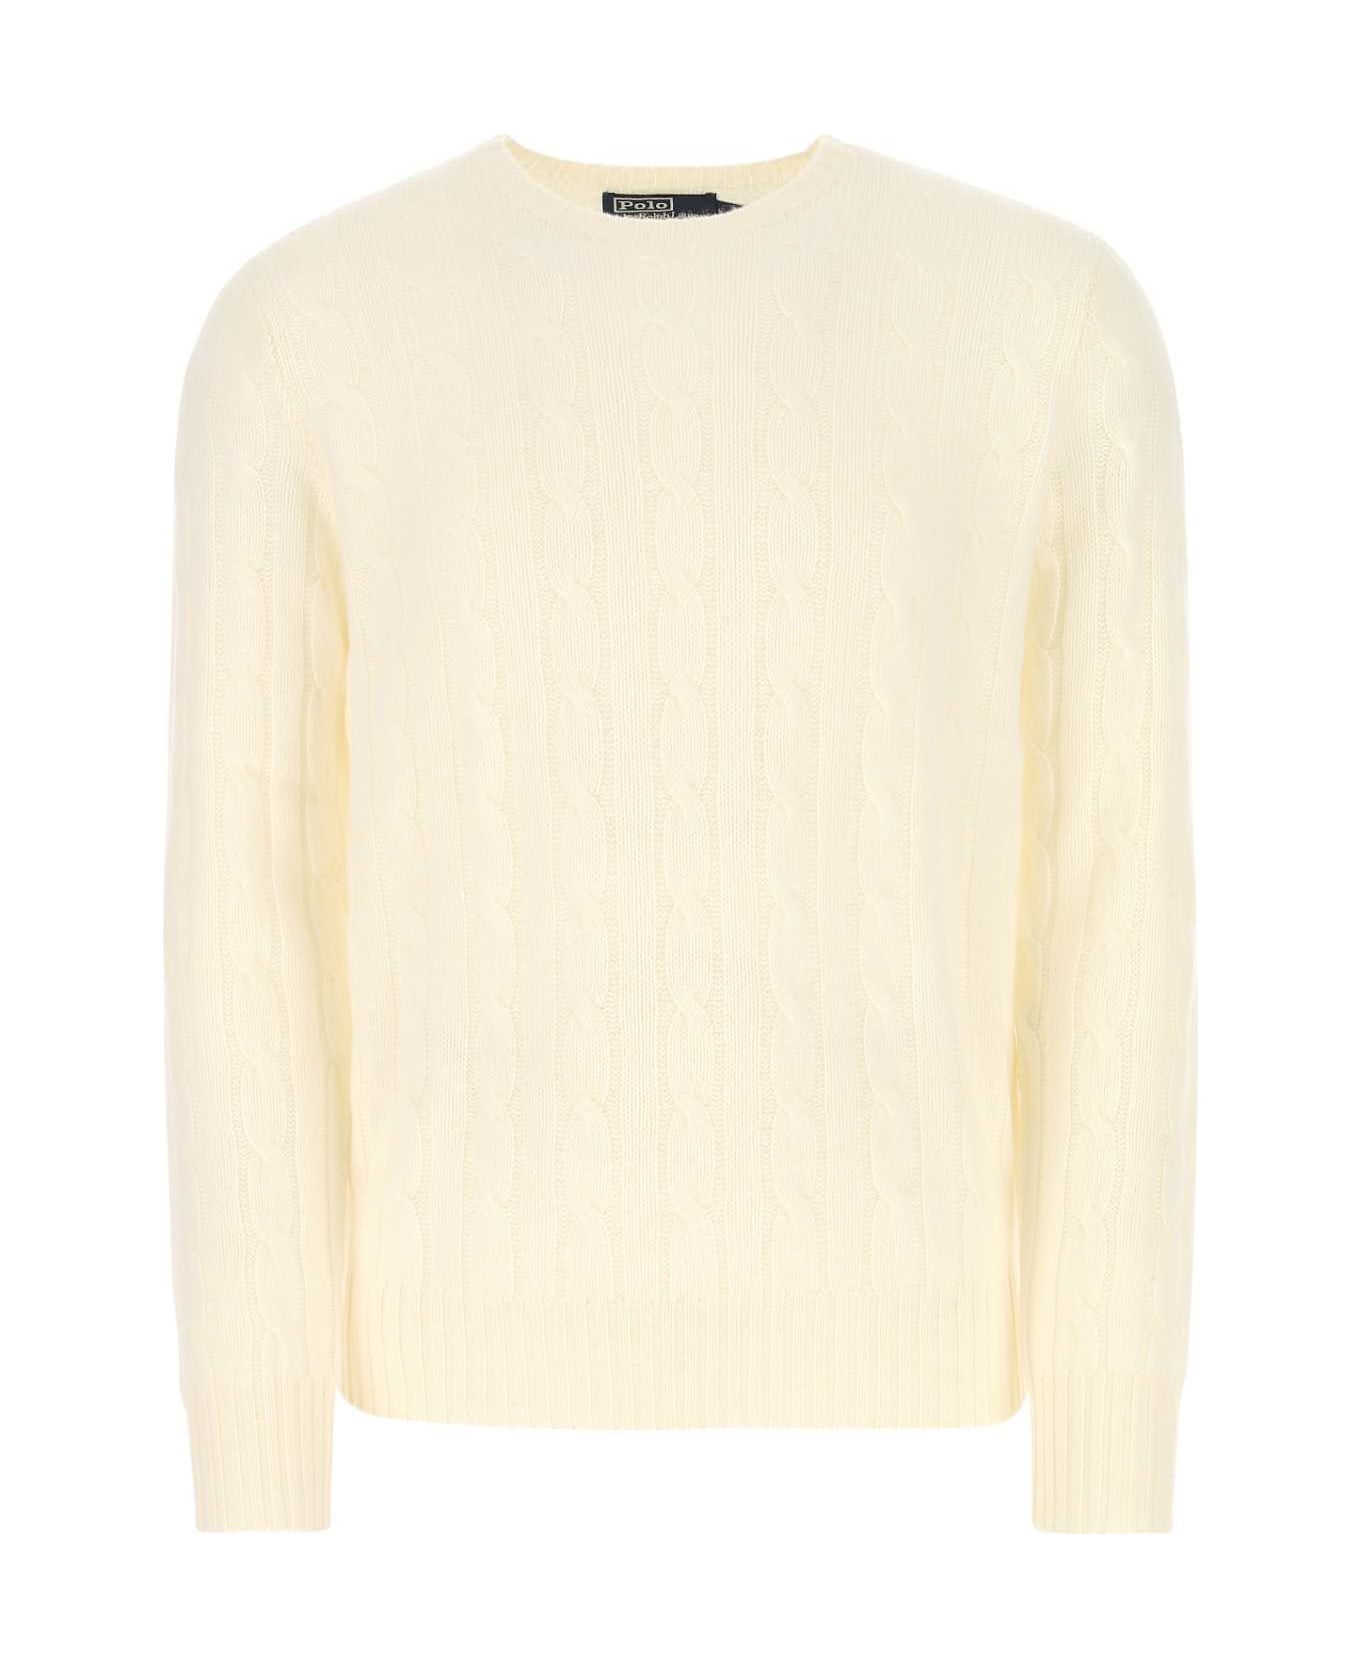 Polo Ralph Lauren Ivory Cashmere Sweater - 010